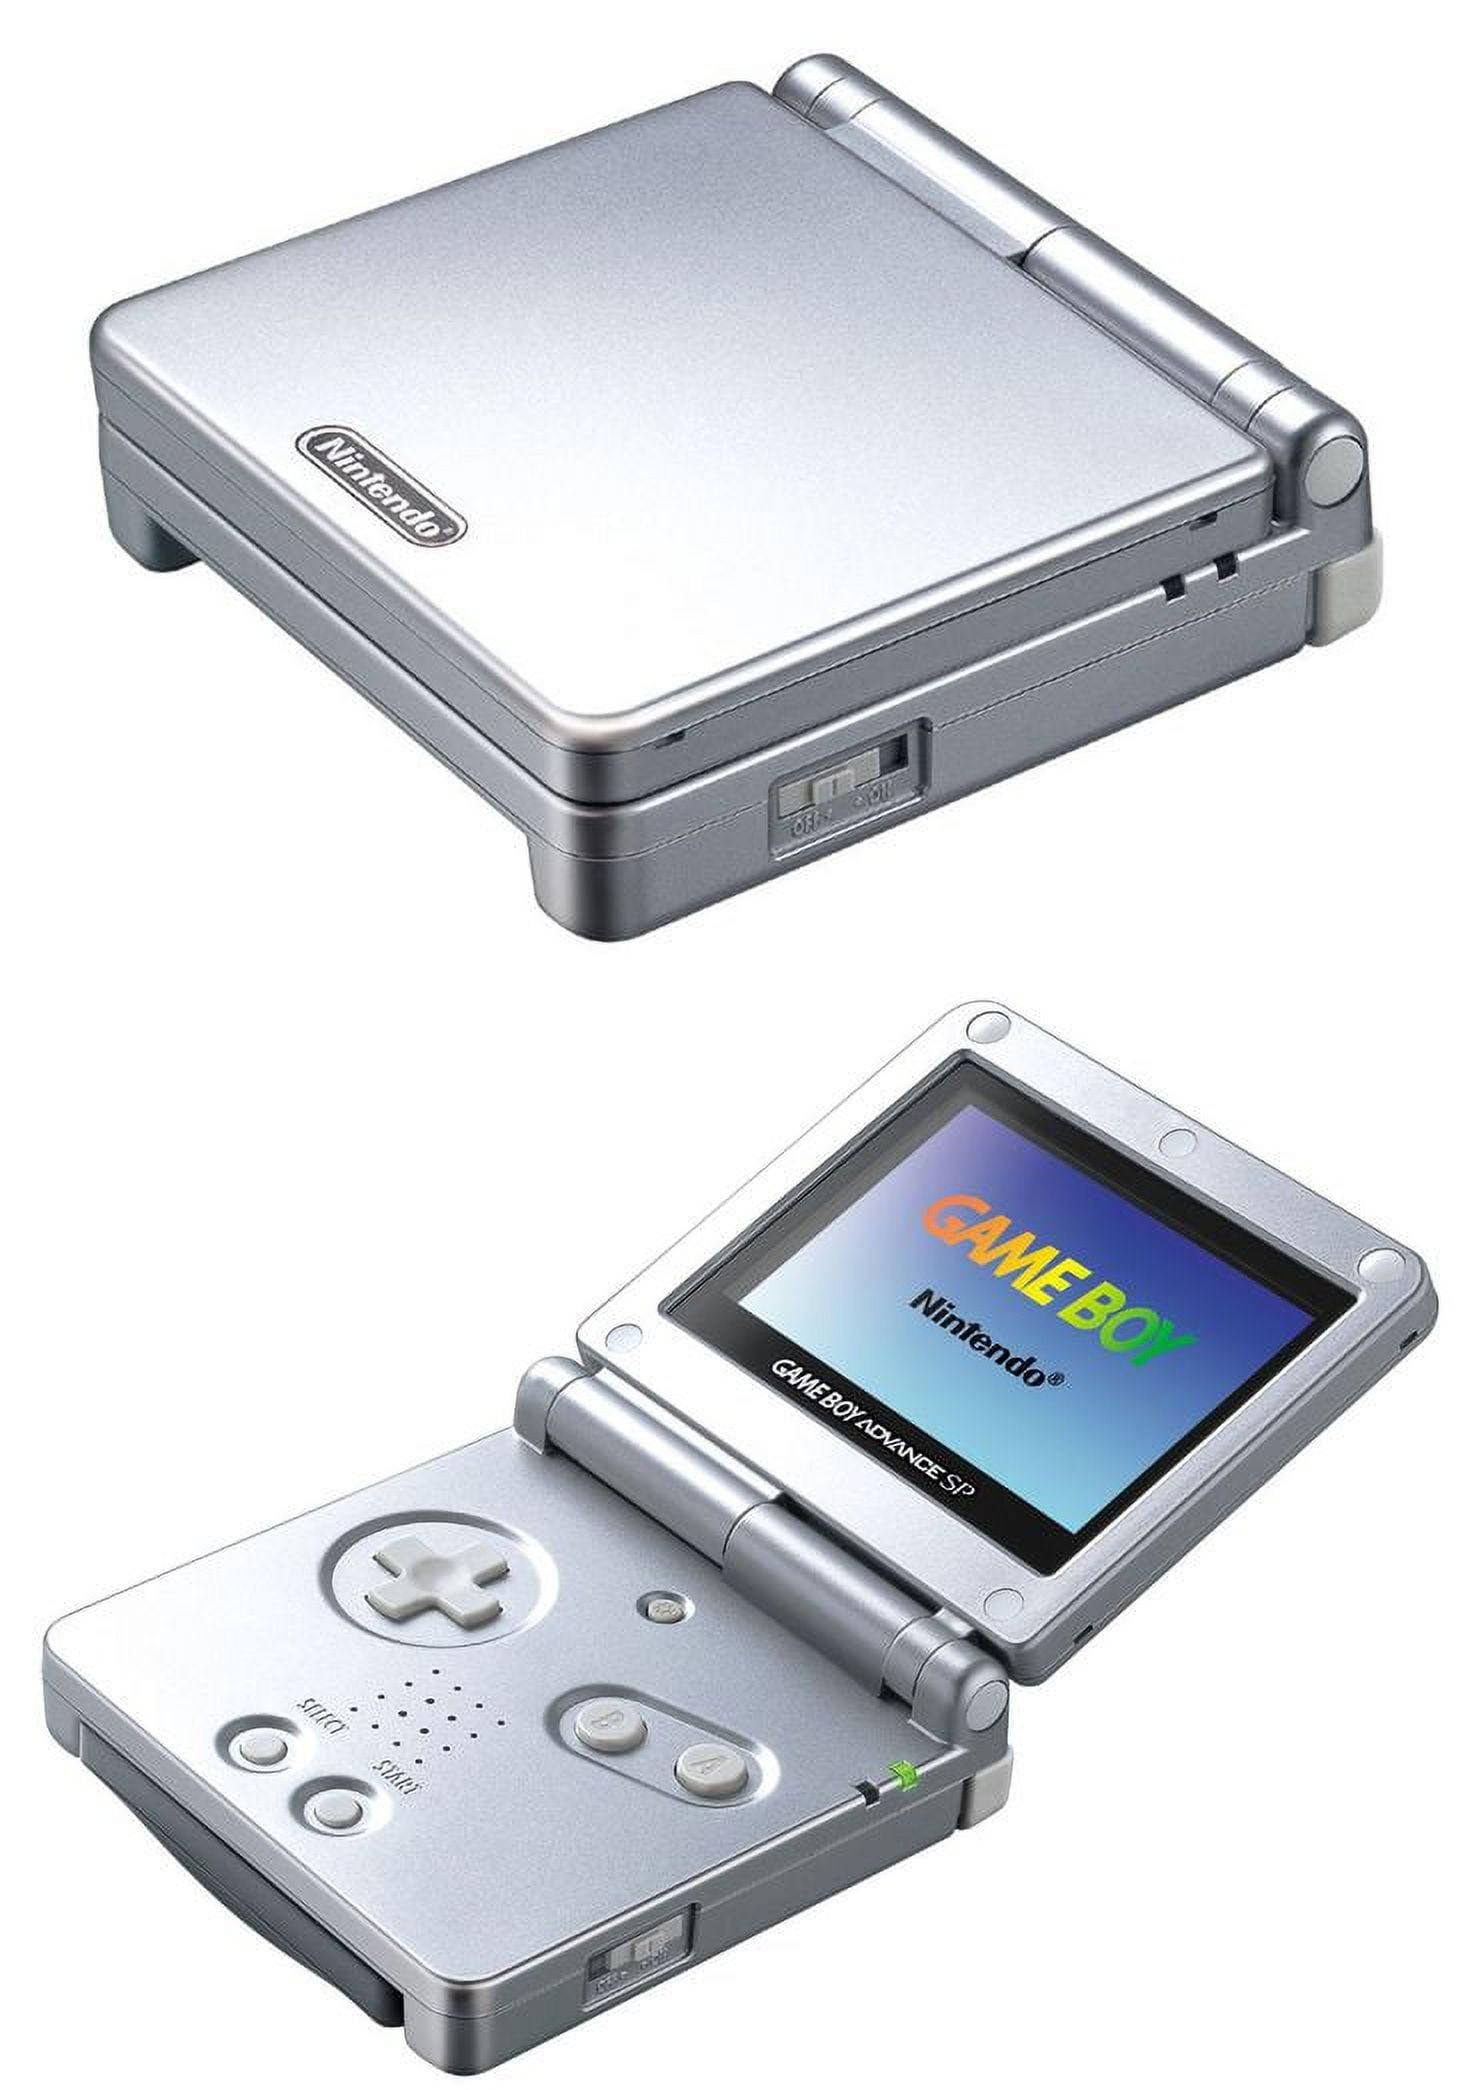 Official Game Boy Advance and Game Boy emulators for Nintendo Switch  seemingly leaked - - Gamereactor